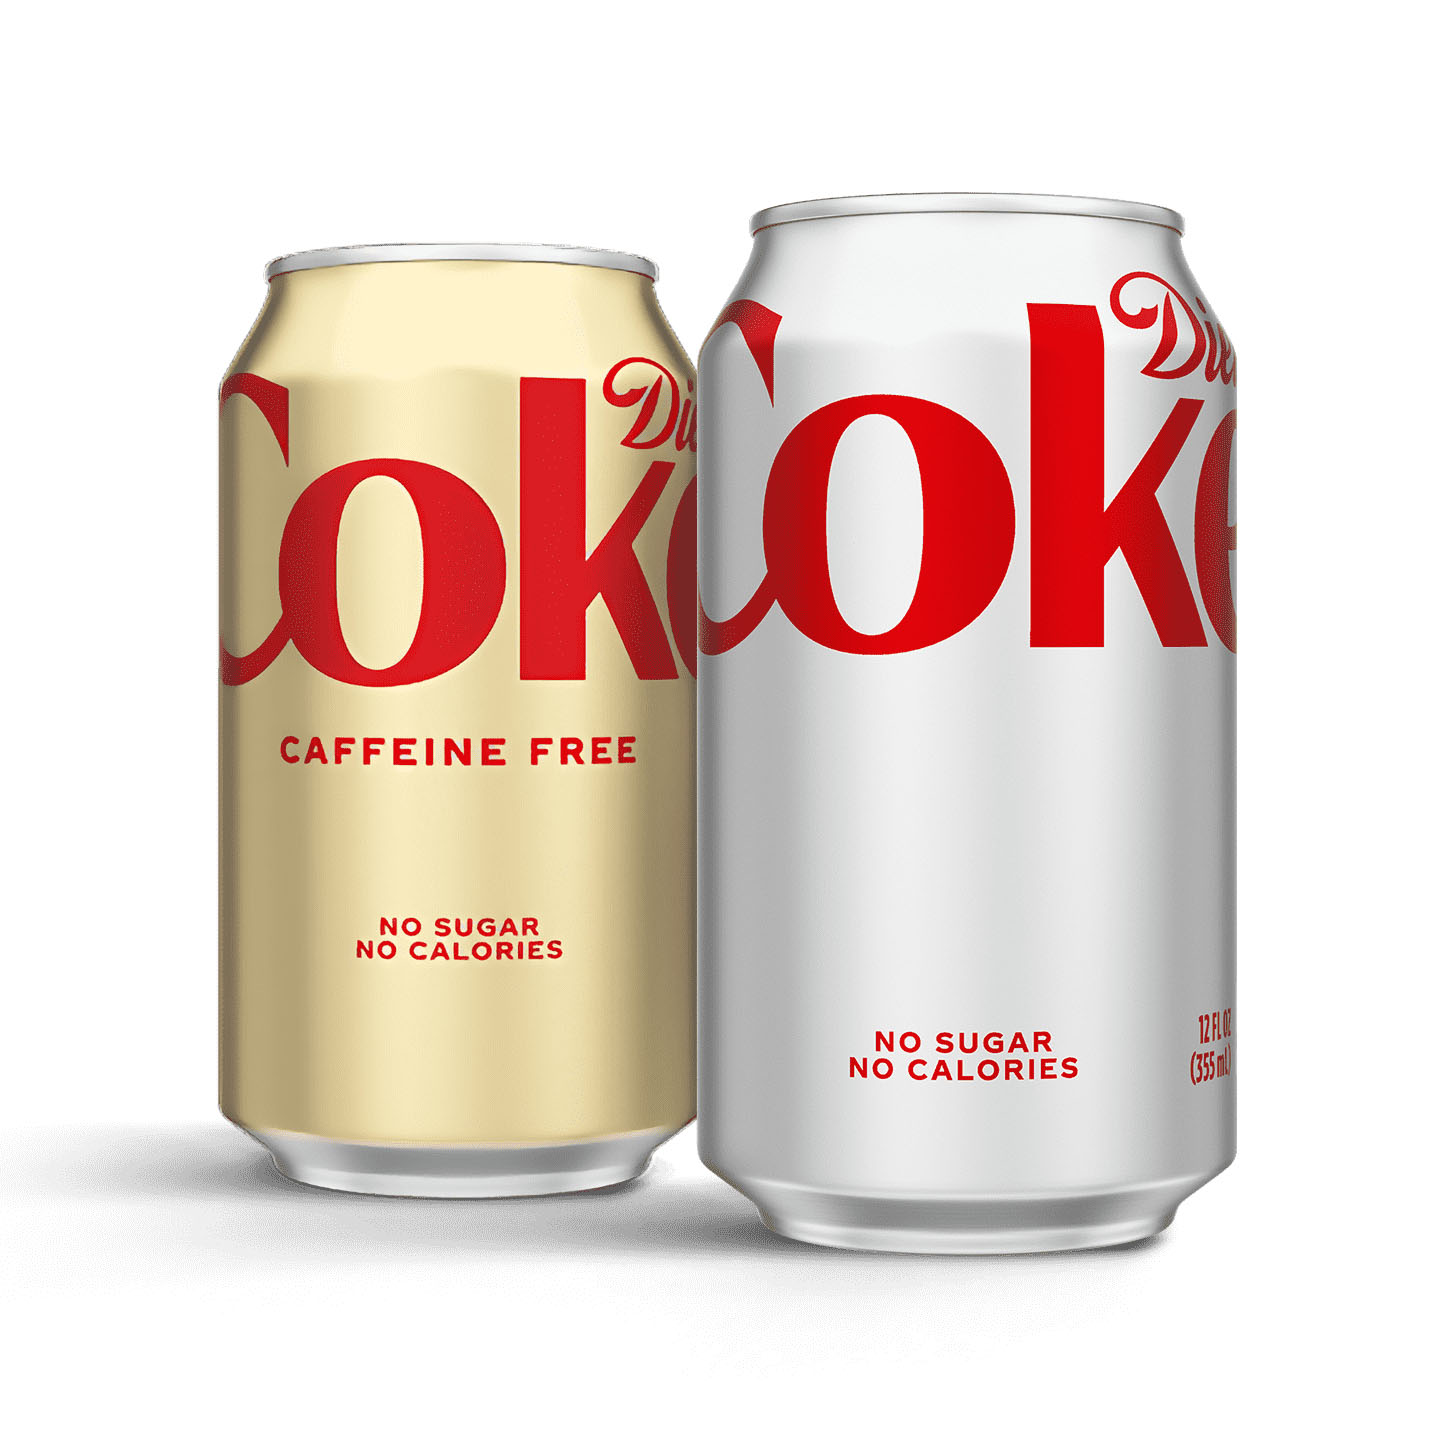 Two cans of Diet Coke